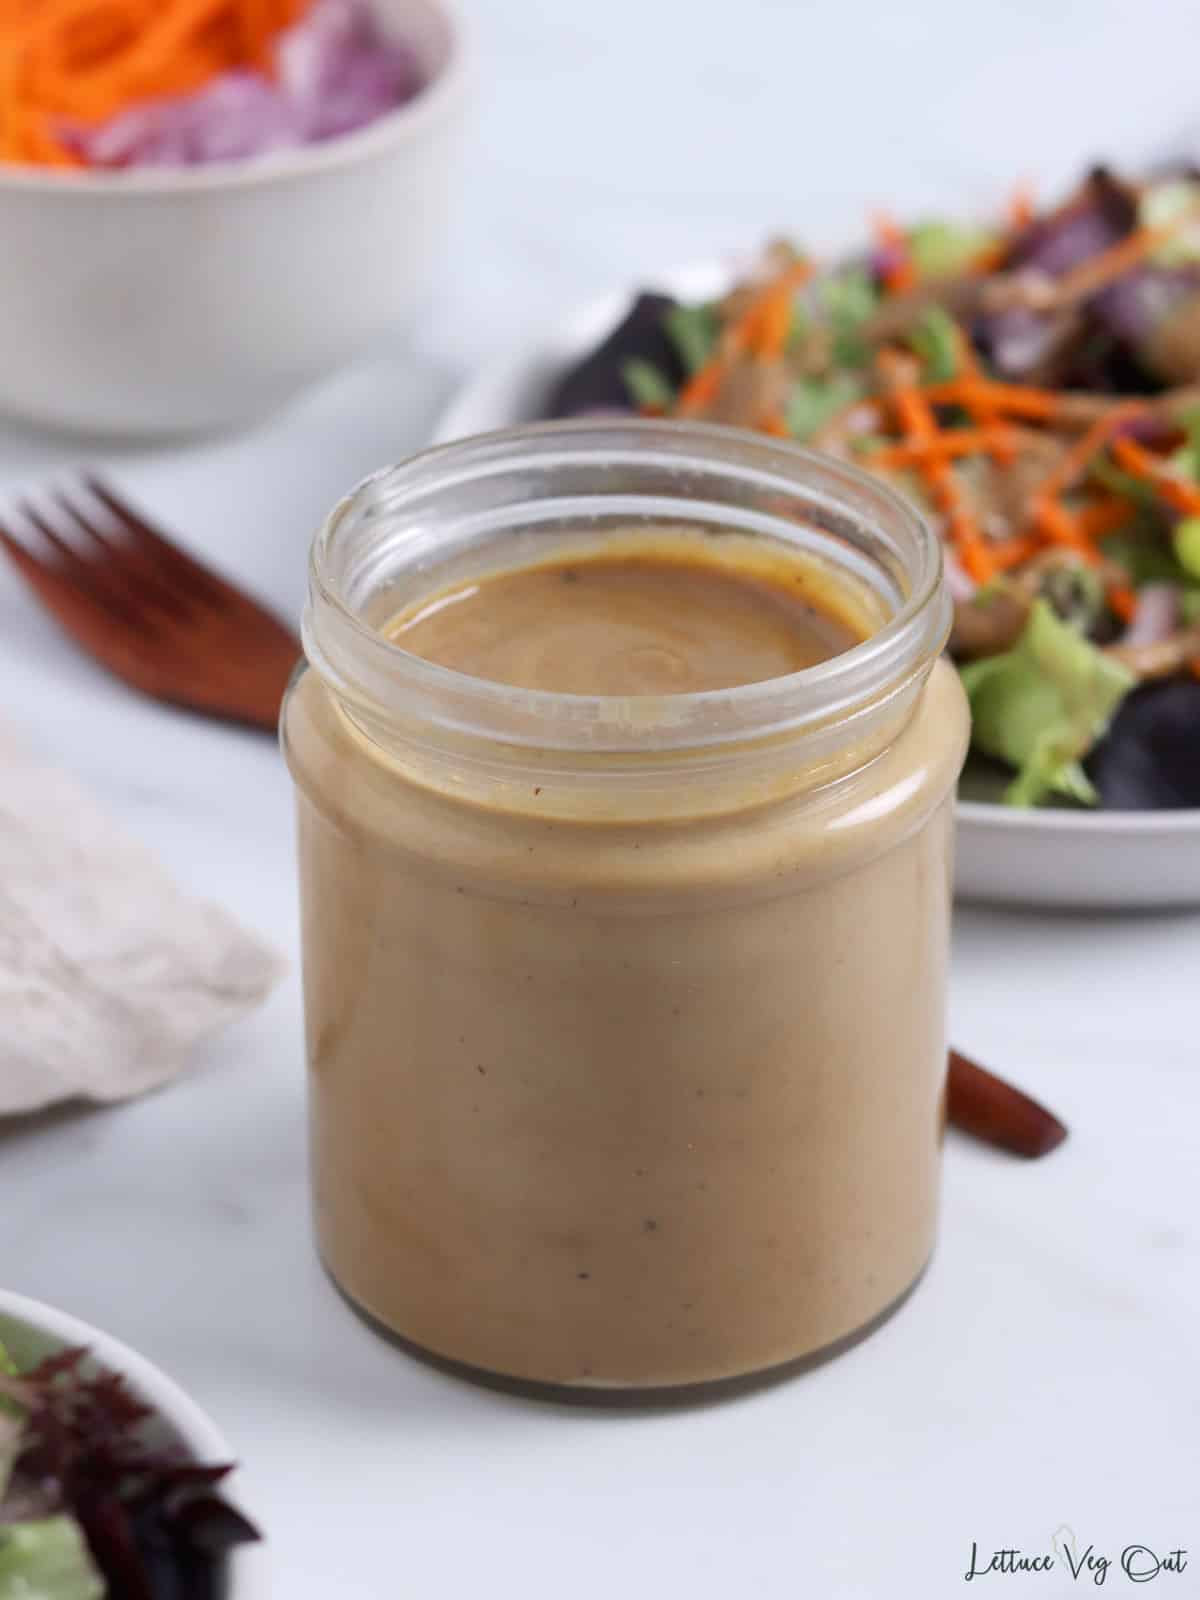 Jar of tahini balsamic dressing with blurry plates of salad surrounding it.